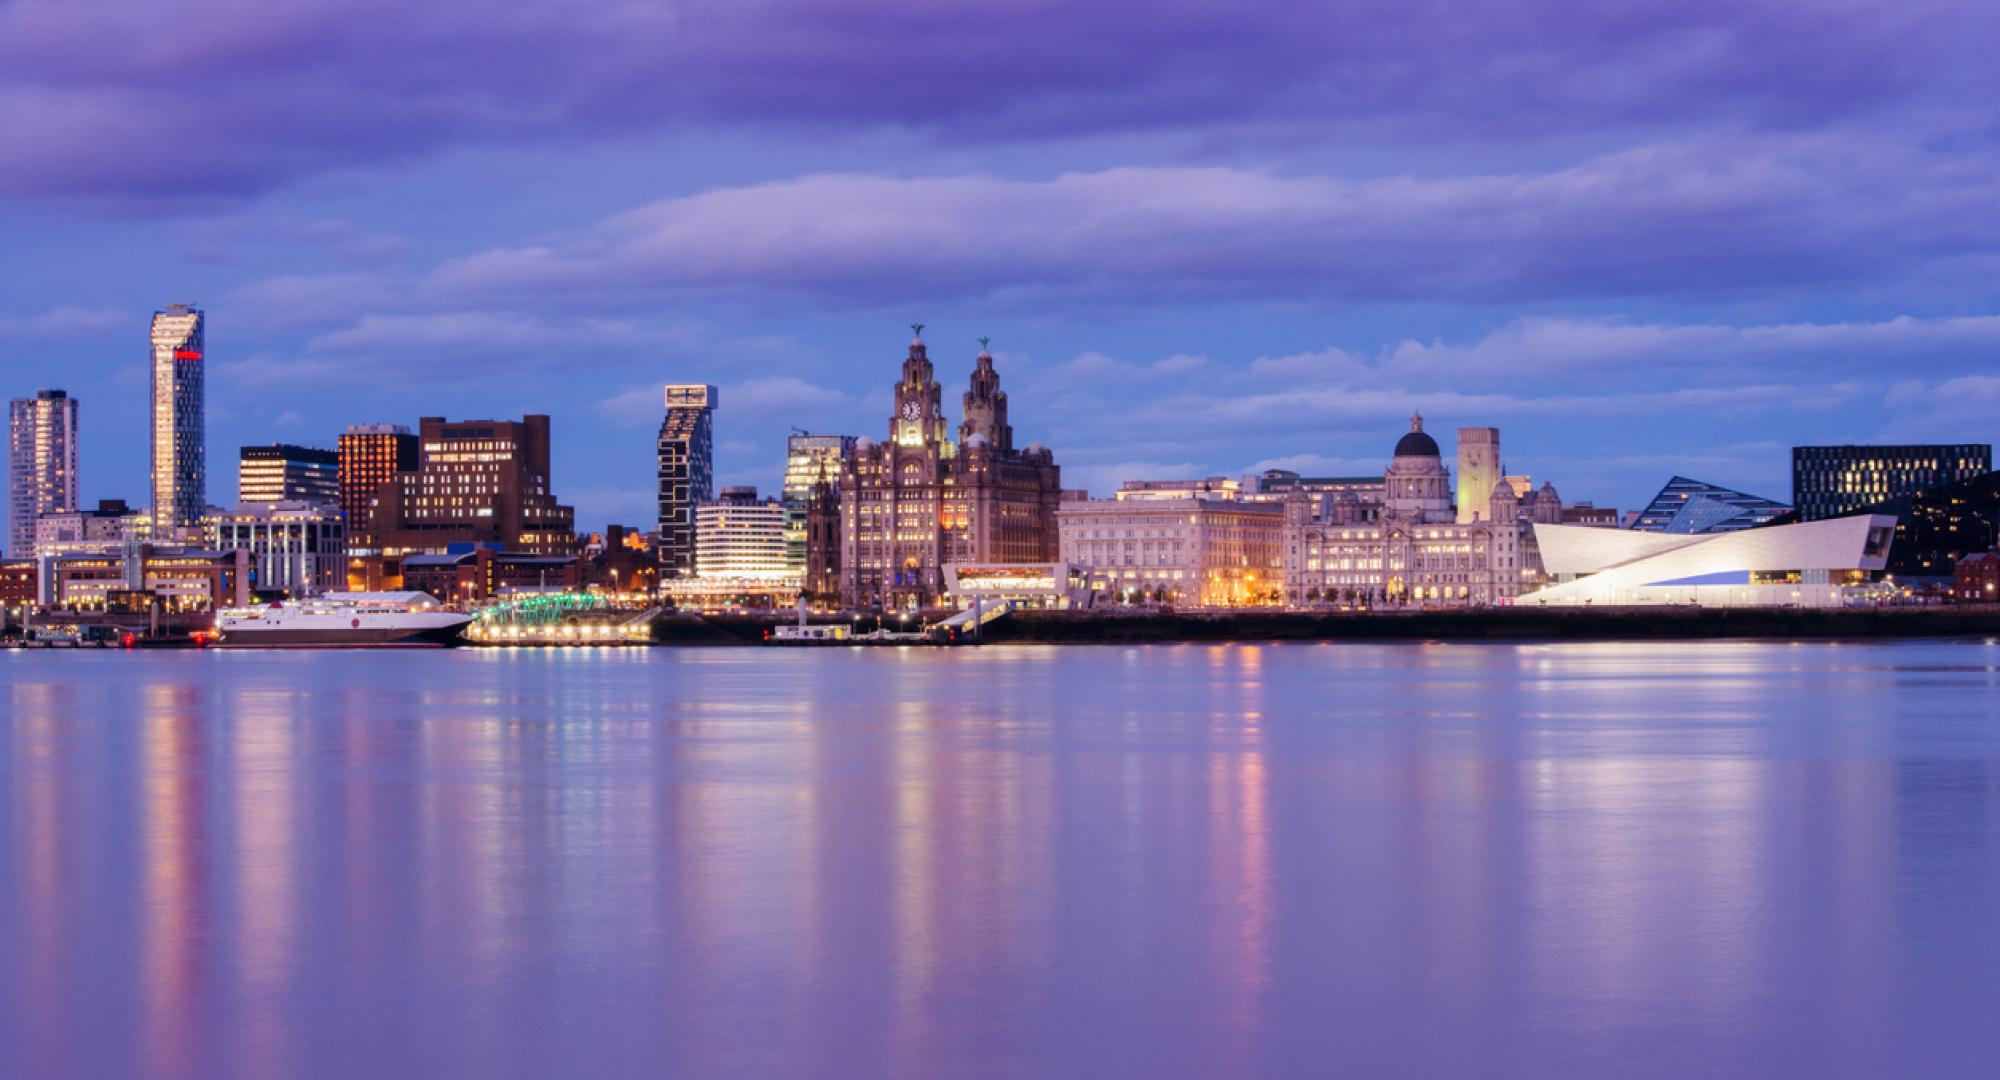 Liverpool at dusk